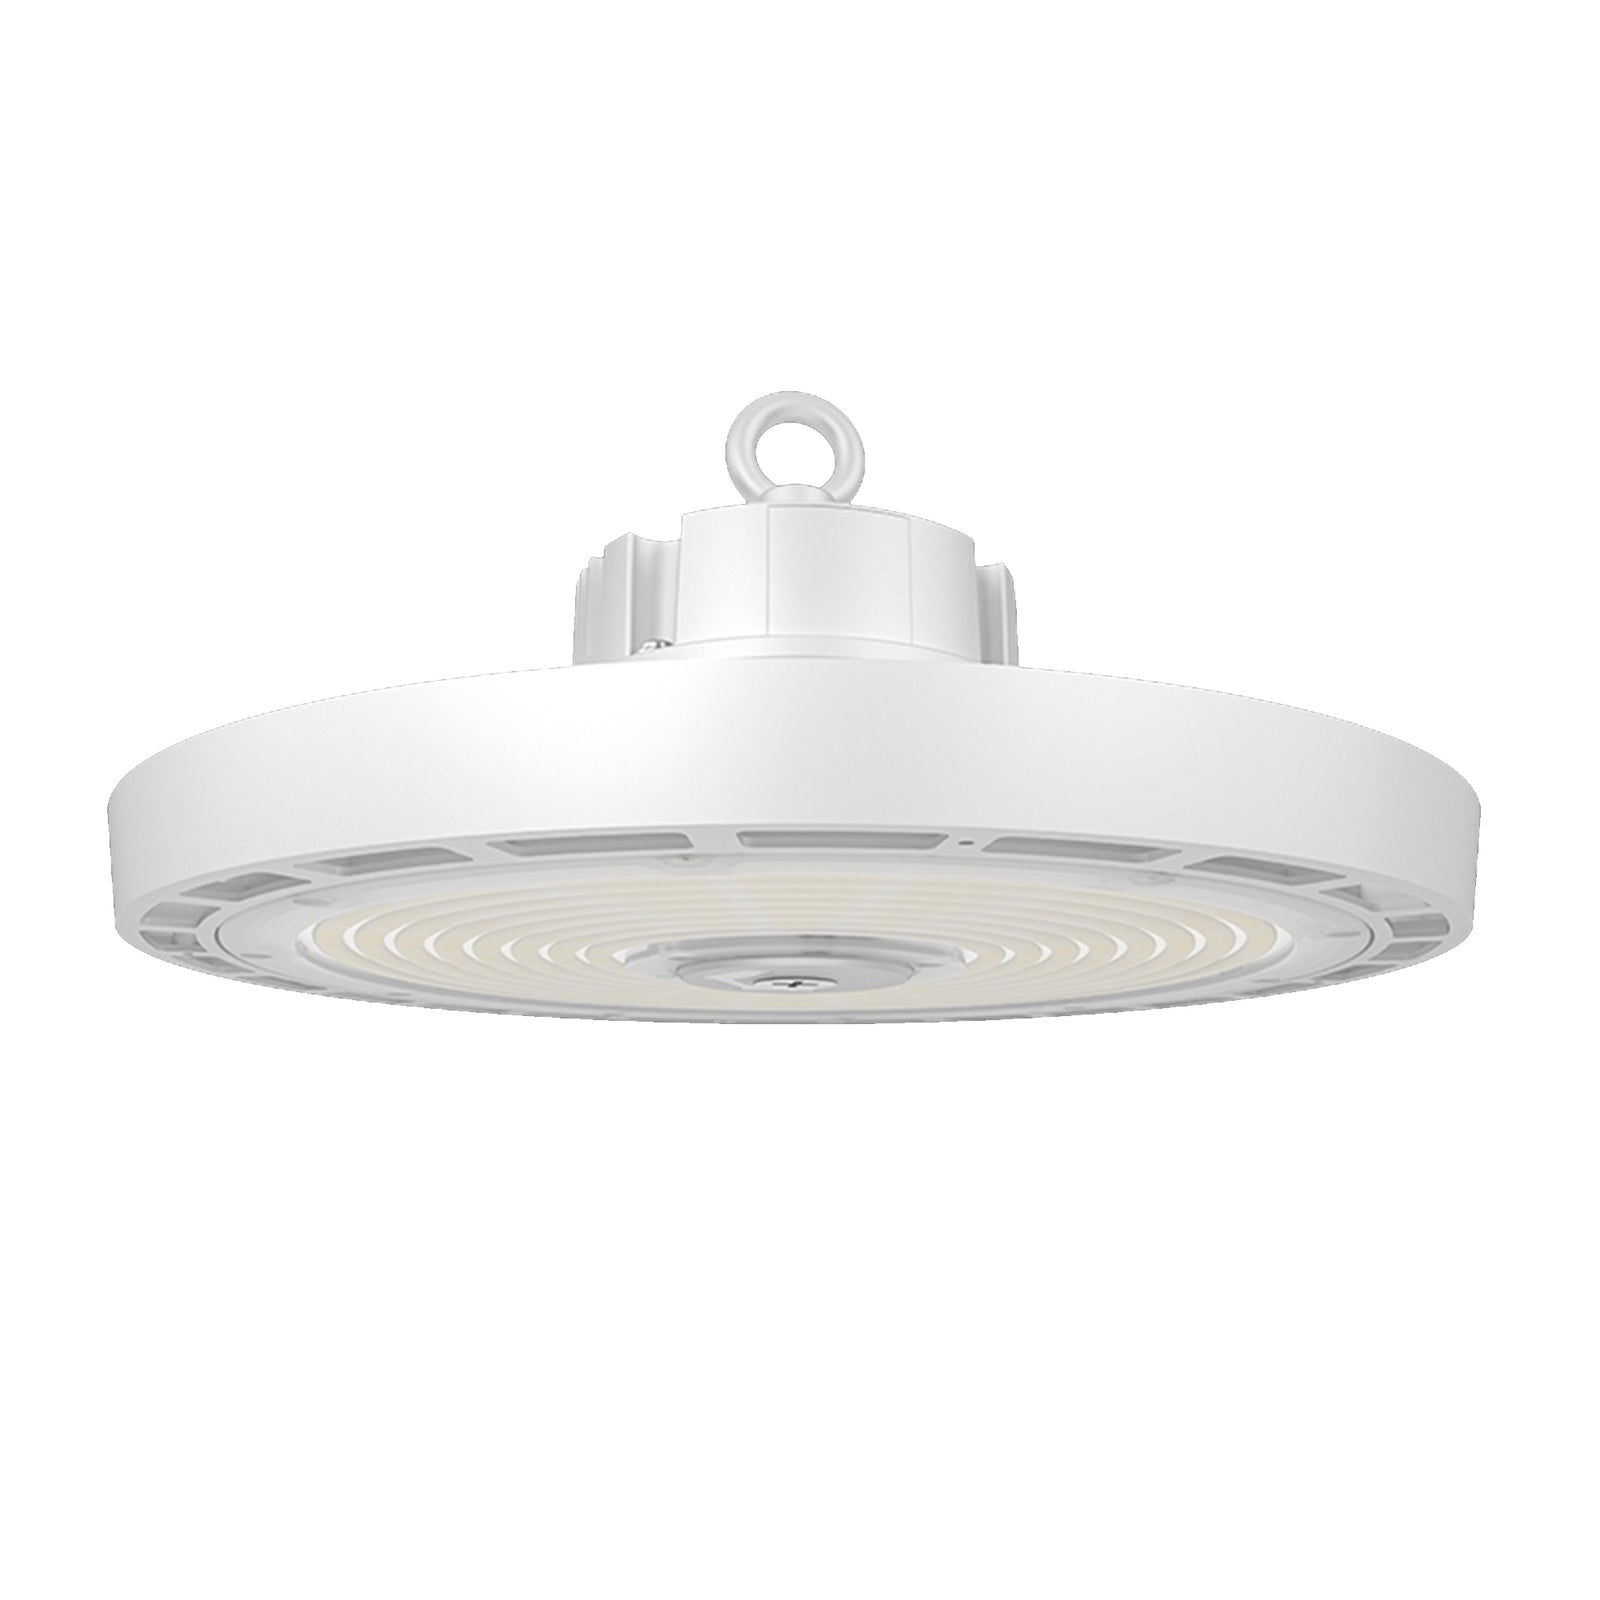 UFO LED High Bay Light - Tunable 80/200/240W, 3000K/4000/5000K, 38400Lm, IP65 Waterproof, 0-10V Dimmable - Ideal for High Ceiling Areas: Warehouses, Workshops, Factories, Garages White